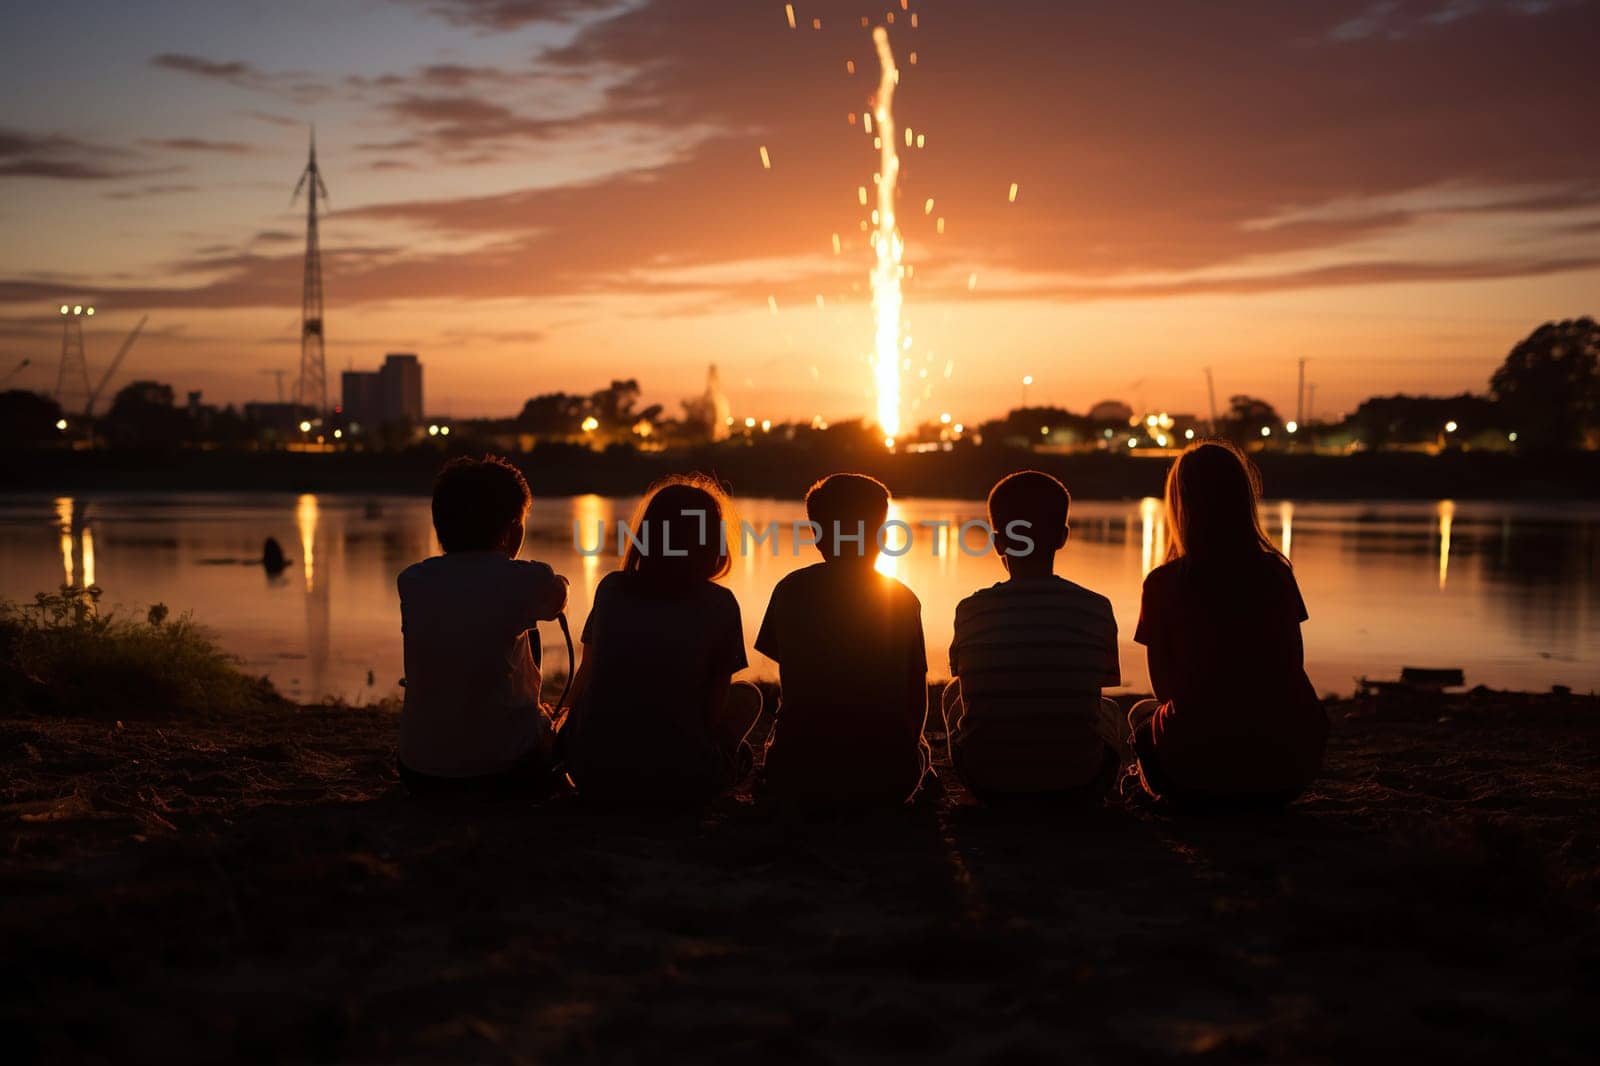 Children sit by the water and look at the sparks in the sky.